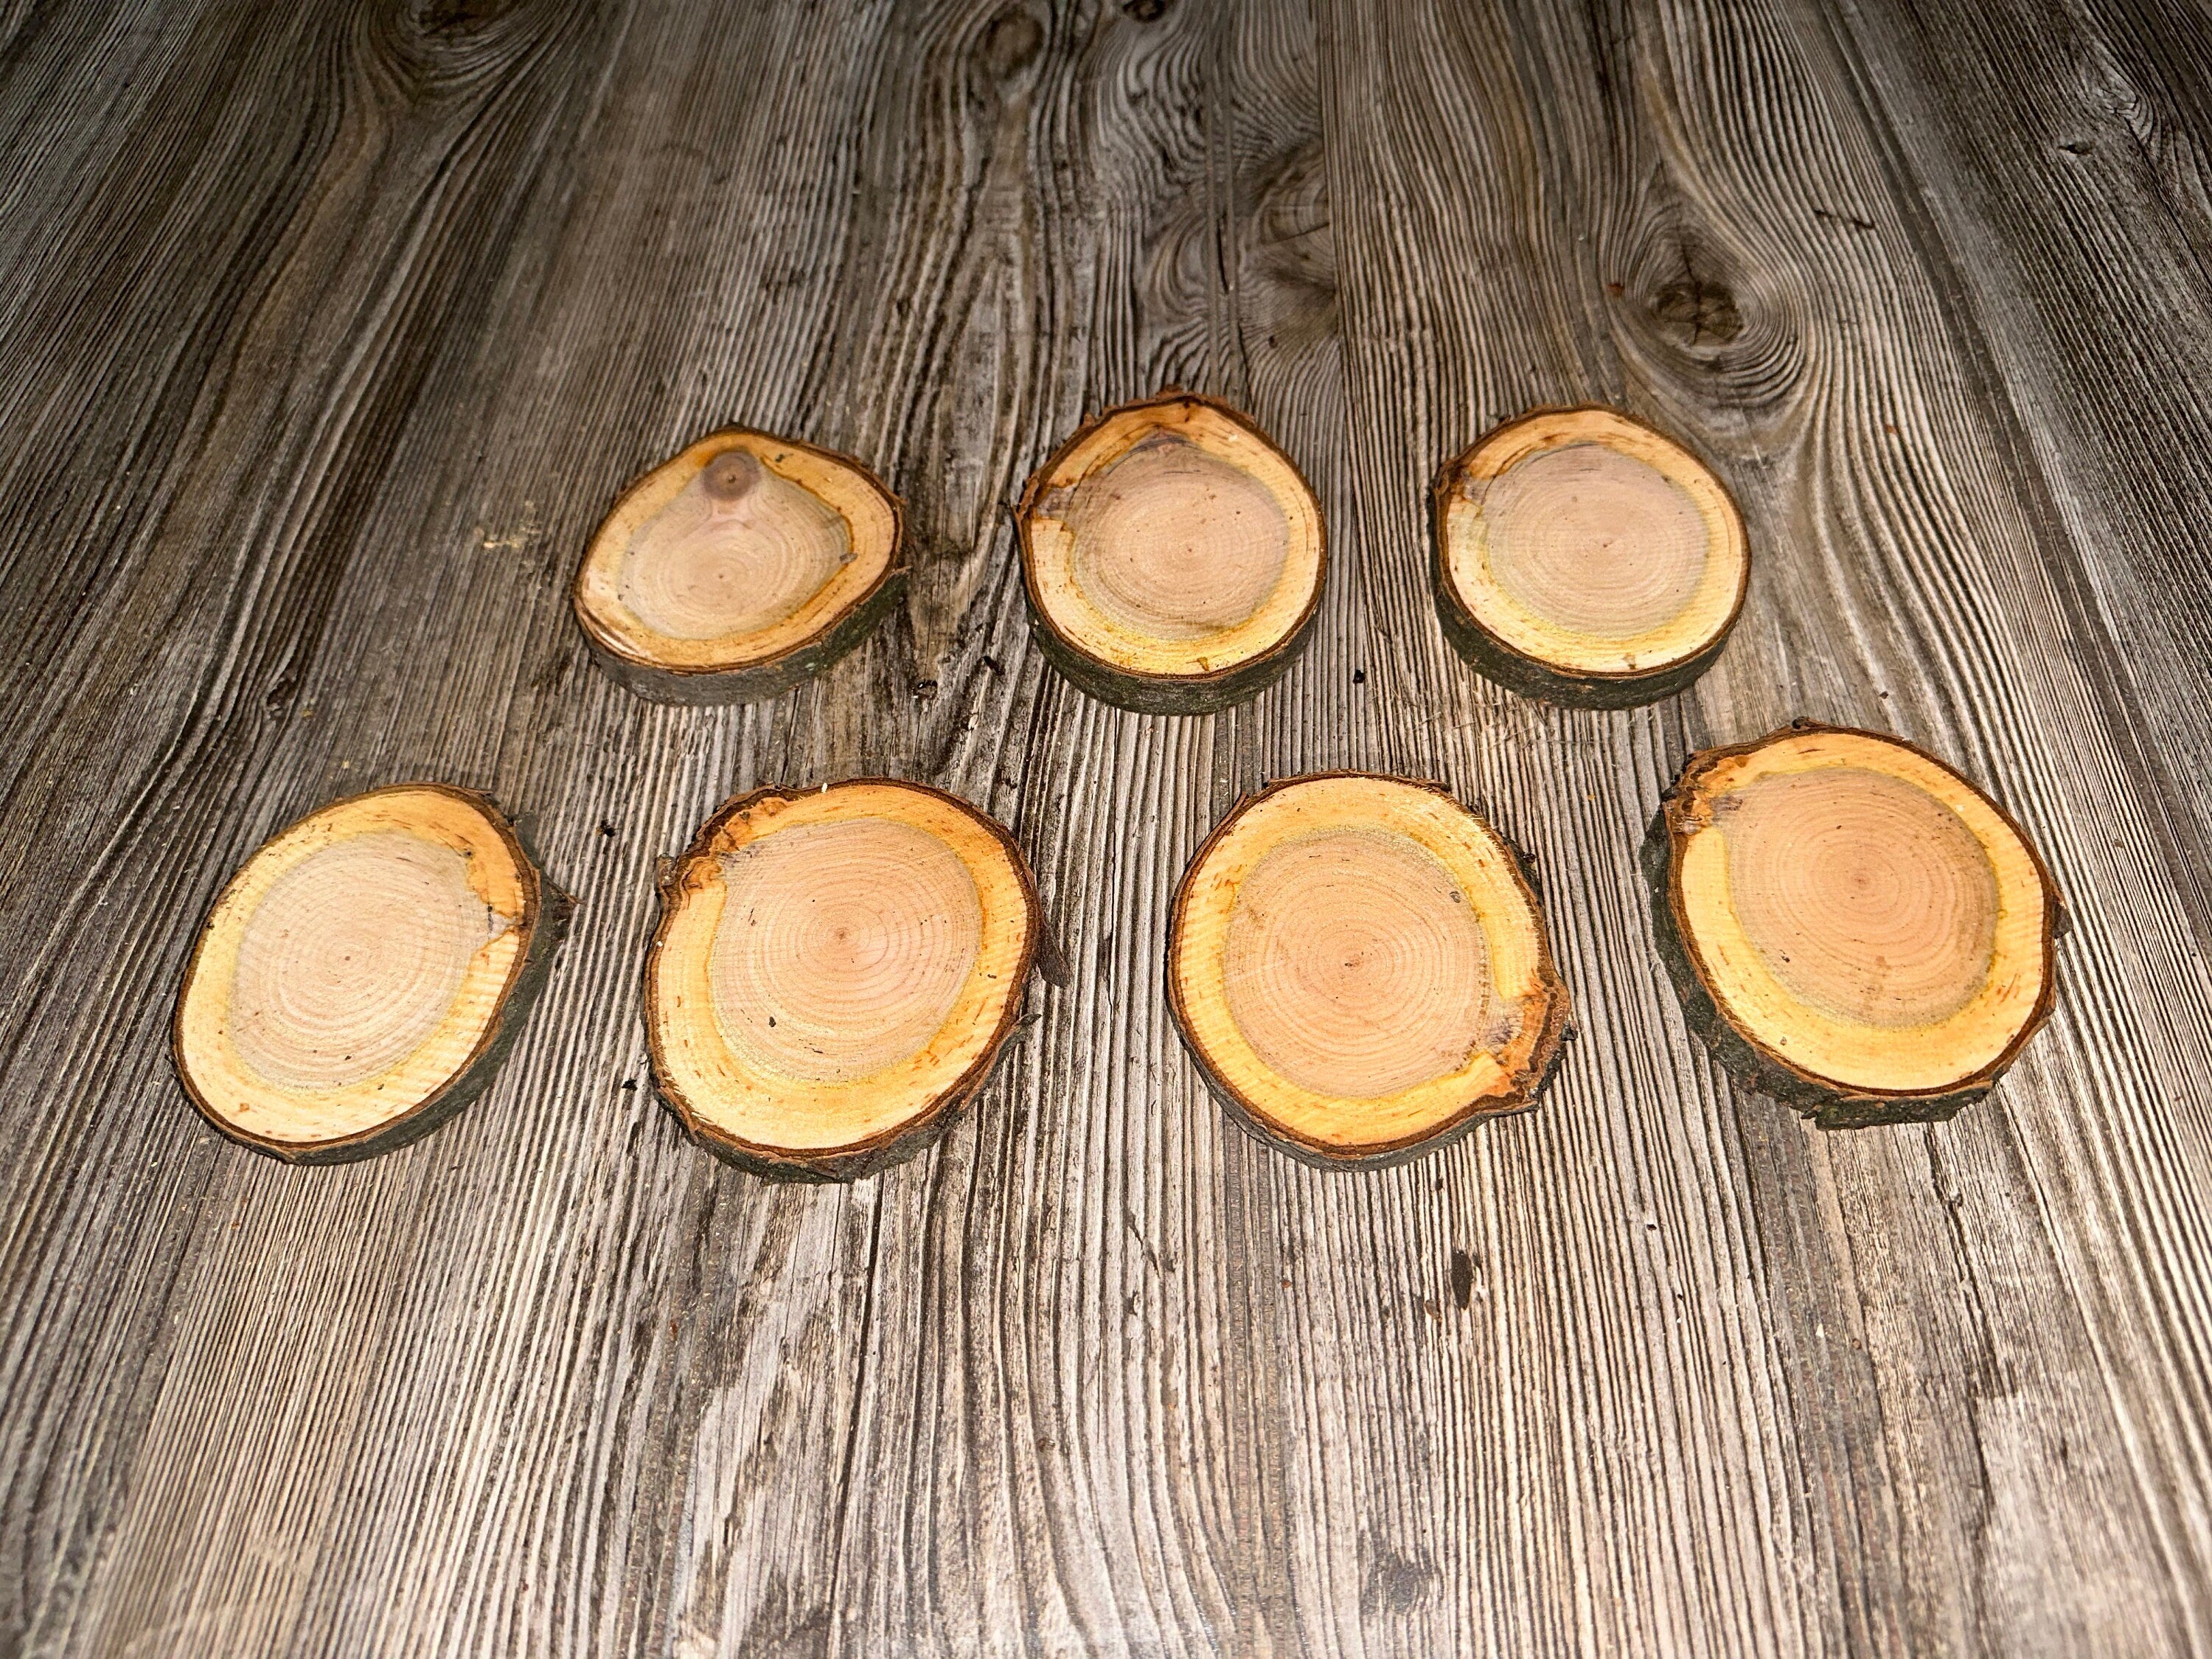 Two Cherry Slices, Cherry Wood Slices Approximately 3.5-4 Inches Long by 3 Inches Wide and 1/2 Inch Thick